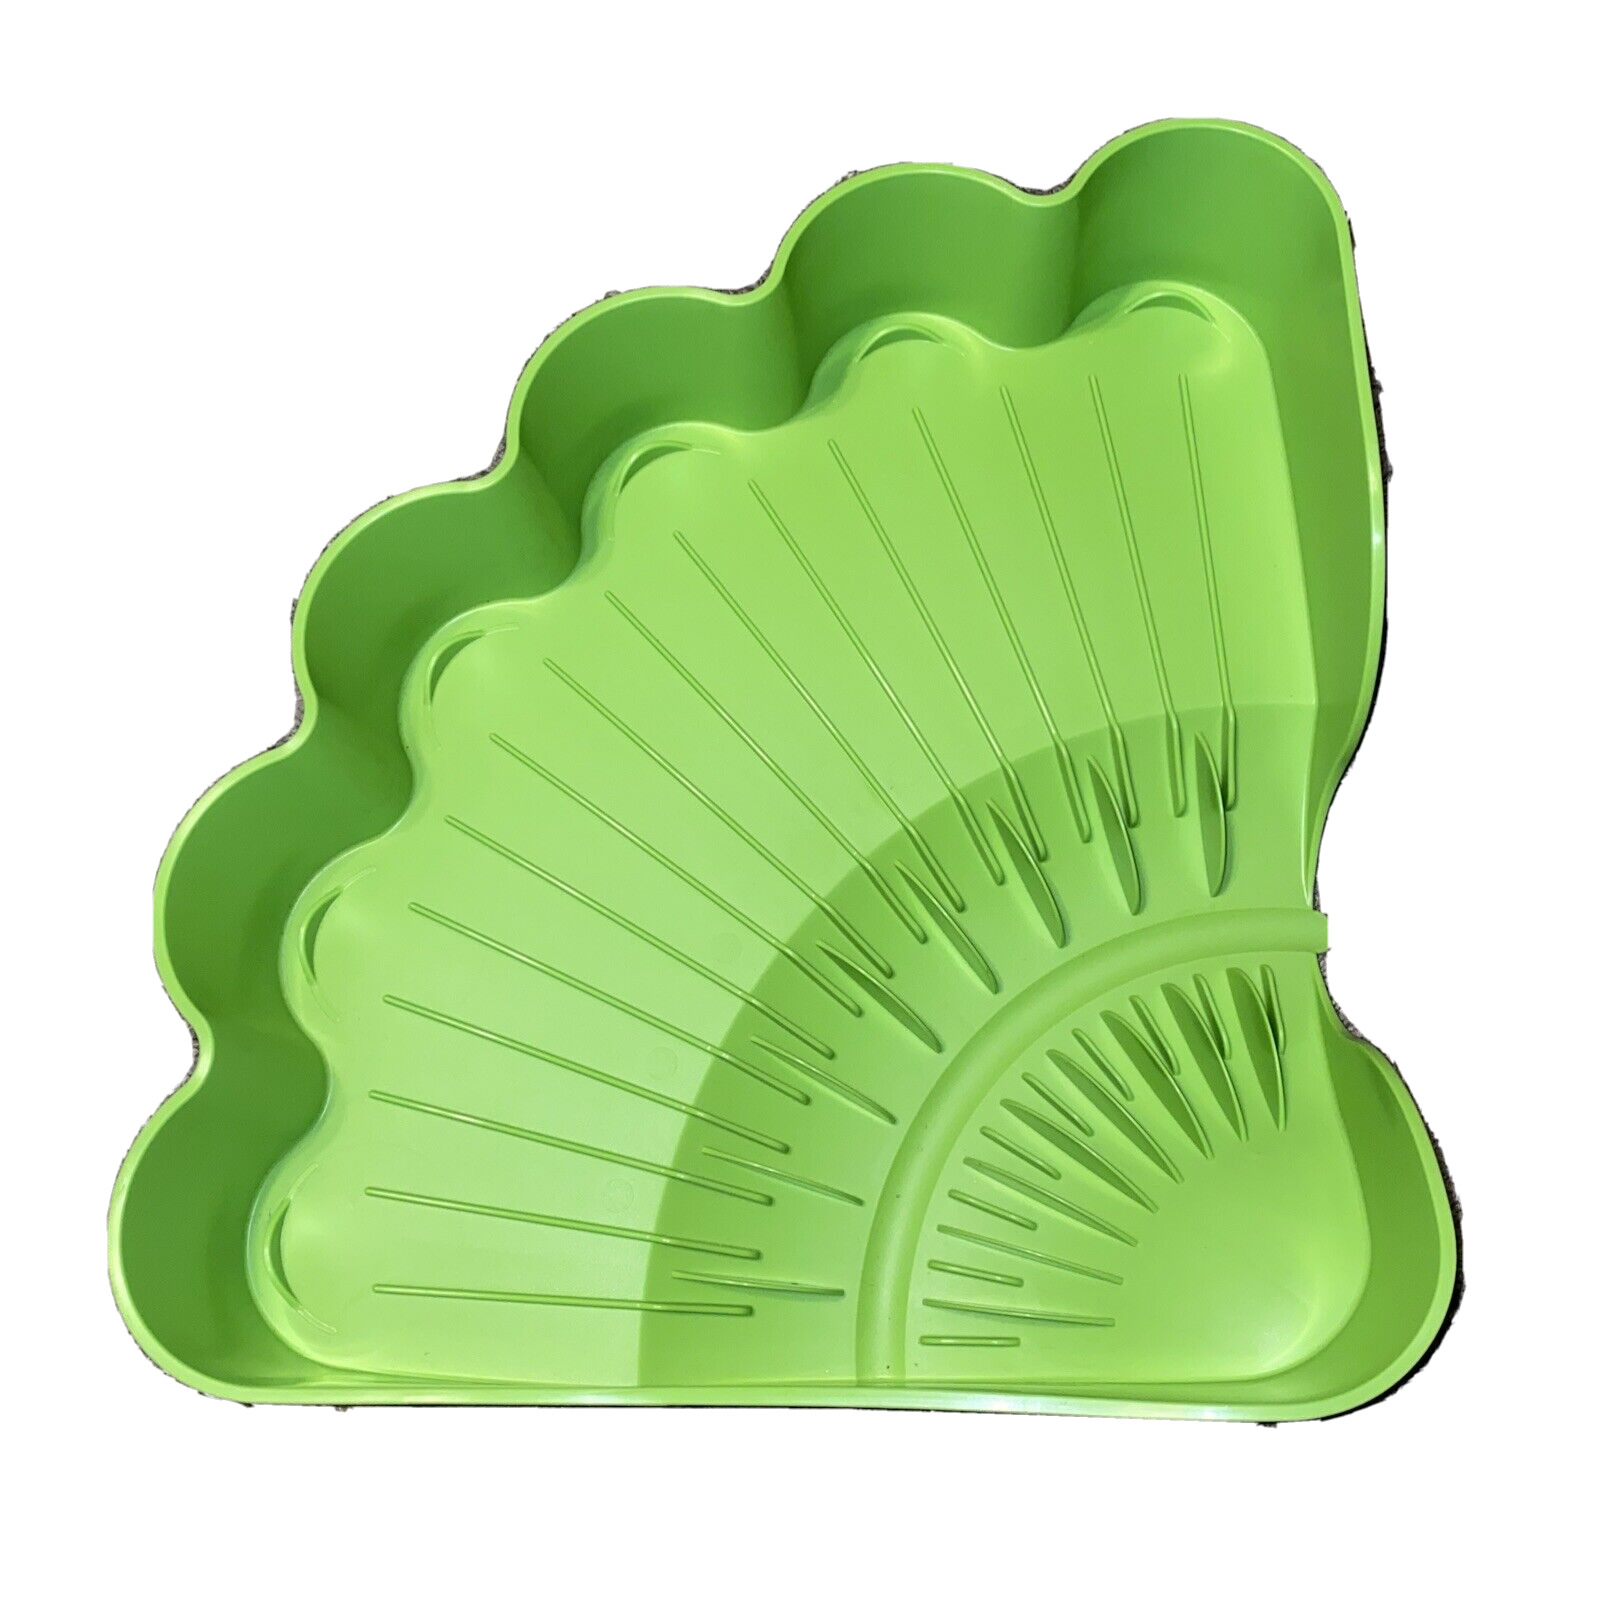 TUPPERWARE EXTRA LARGE DISH EASY DRY IN LIME GREEN LOOKS GREAT SEE AS-IS